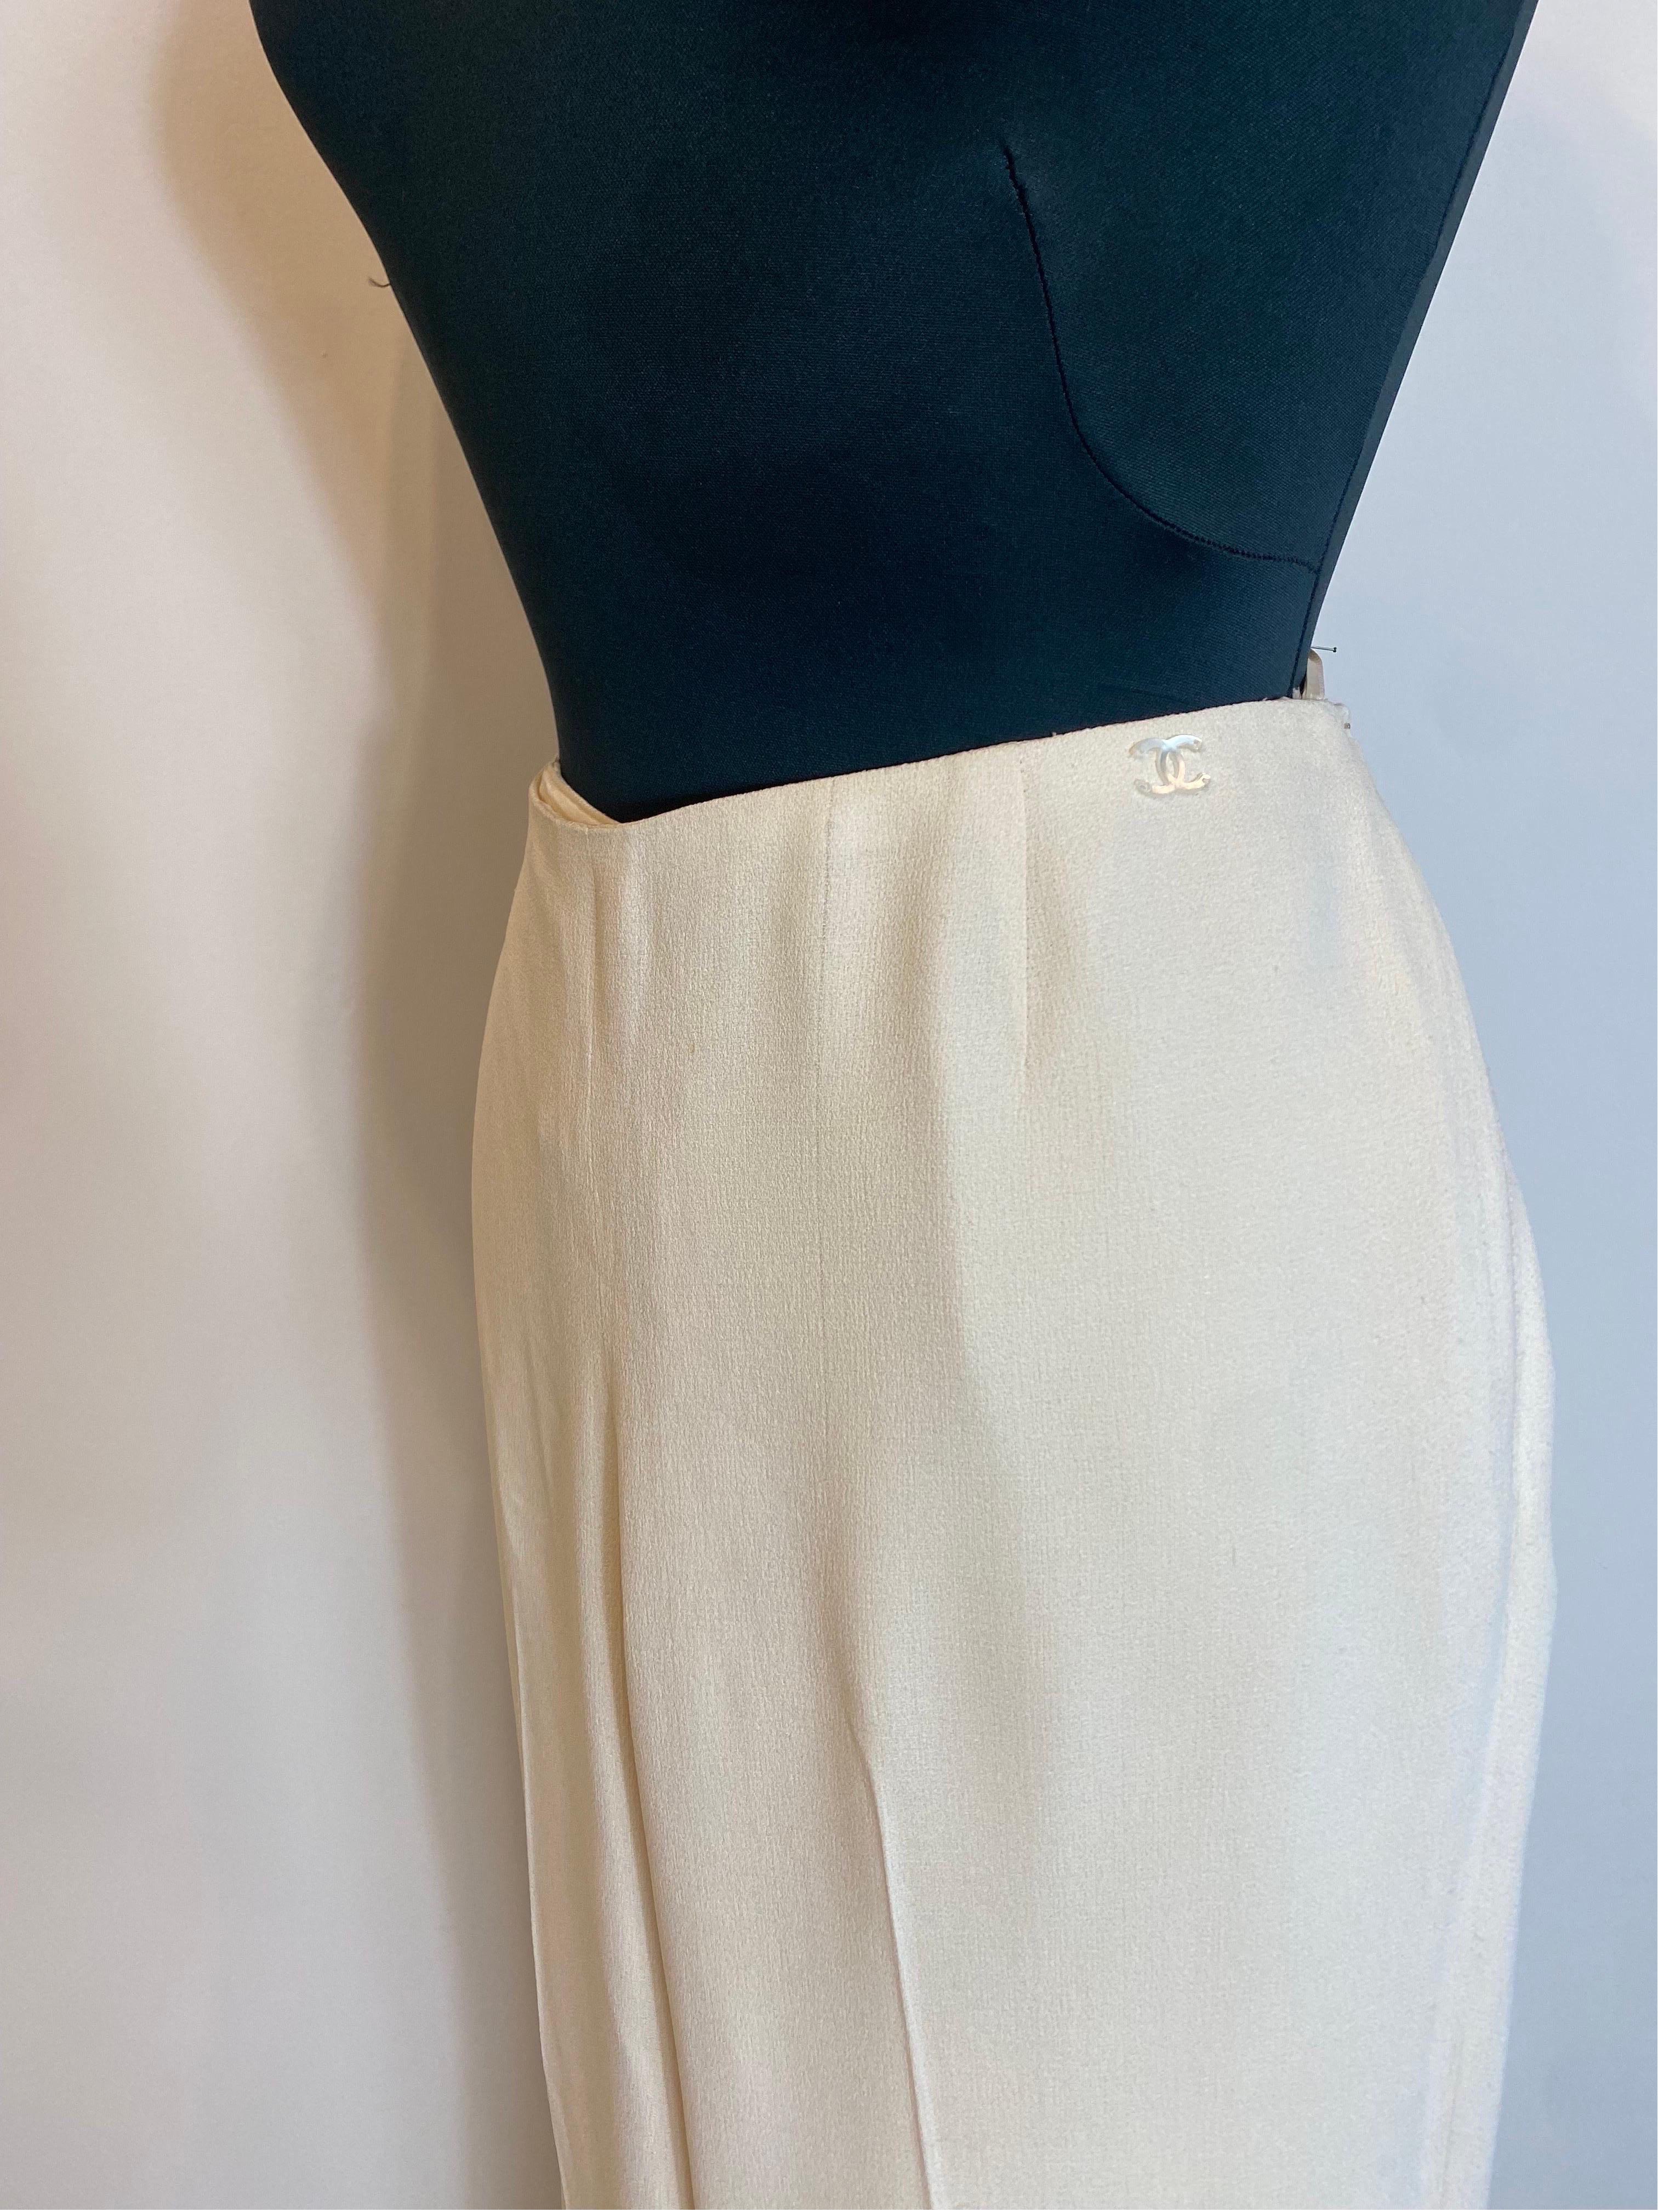 In acetate and viscose, silk lining.
It fits well and fits well.
Invisible side zip. Mother of pearl logo on the waist.
Size 42 international.
Life 43
Length 110
Hips 46
In good overall condition, shows signs of normal use.
As shown in the photo,